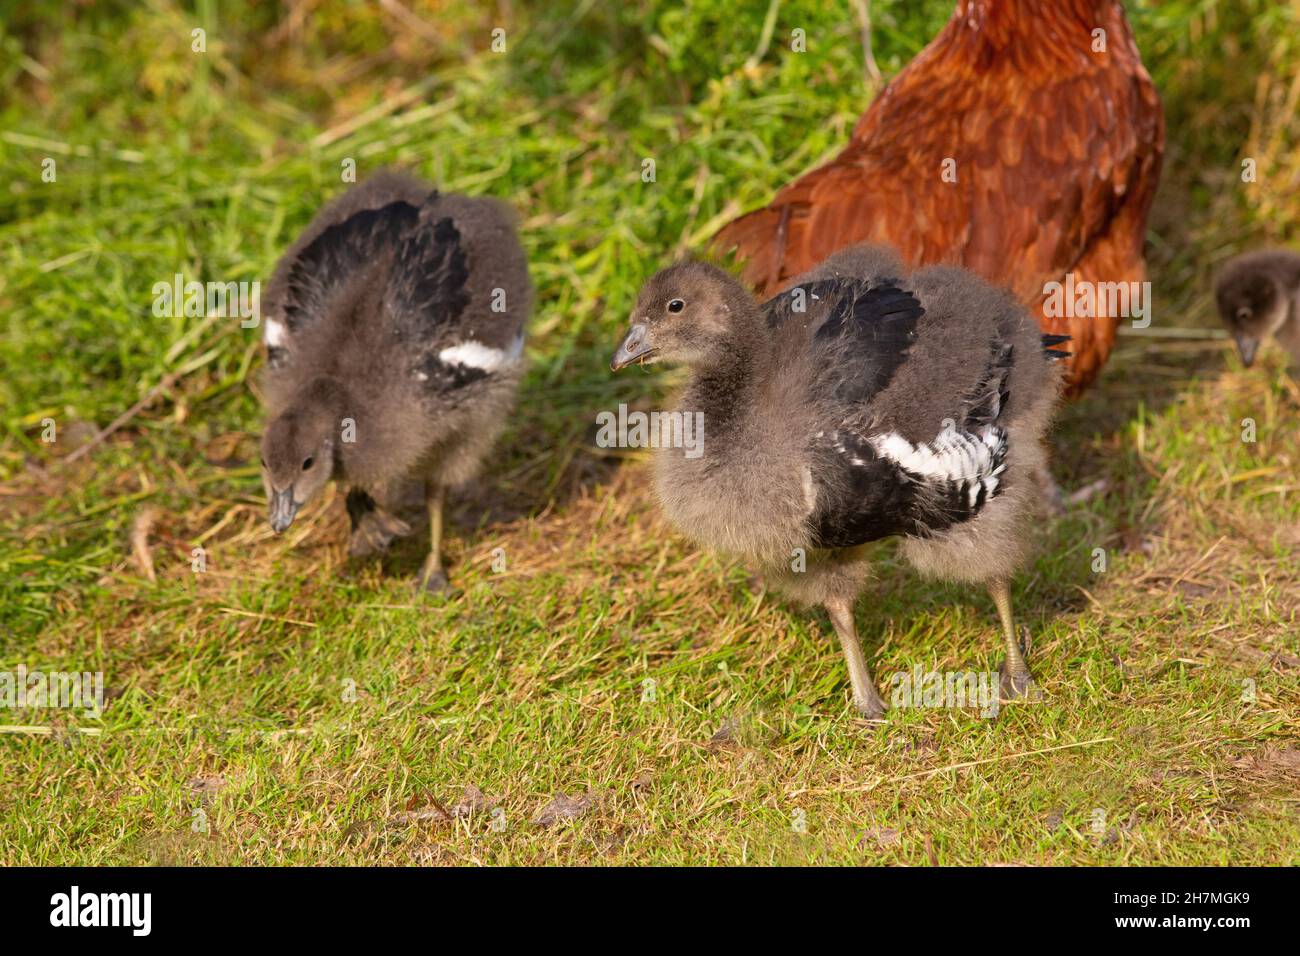 Red-breasted Geese (Branta ruficollis). Immature, juvenile birds, or goslings, 14 days old being foster reared by a domestic broody hen in background. Stock Photo